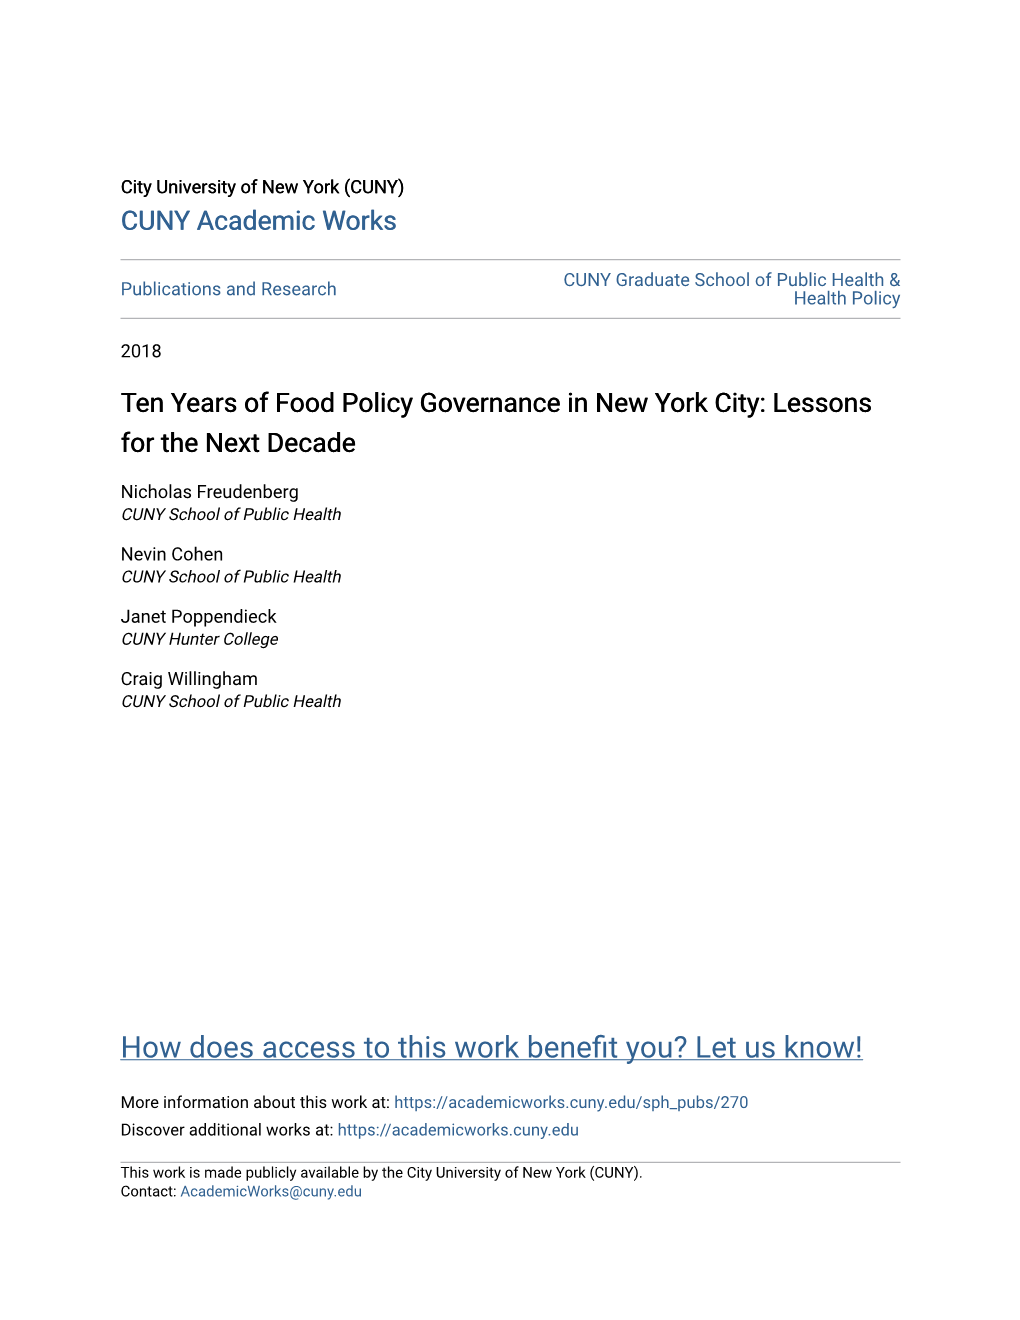 Ten Years of Food Policy Governance in New York City: Lessons for the Next Decade